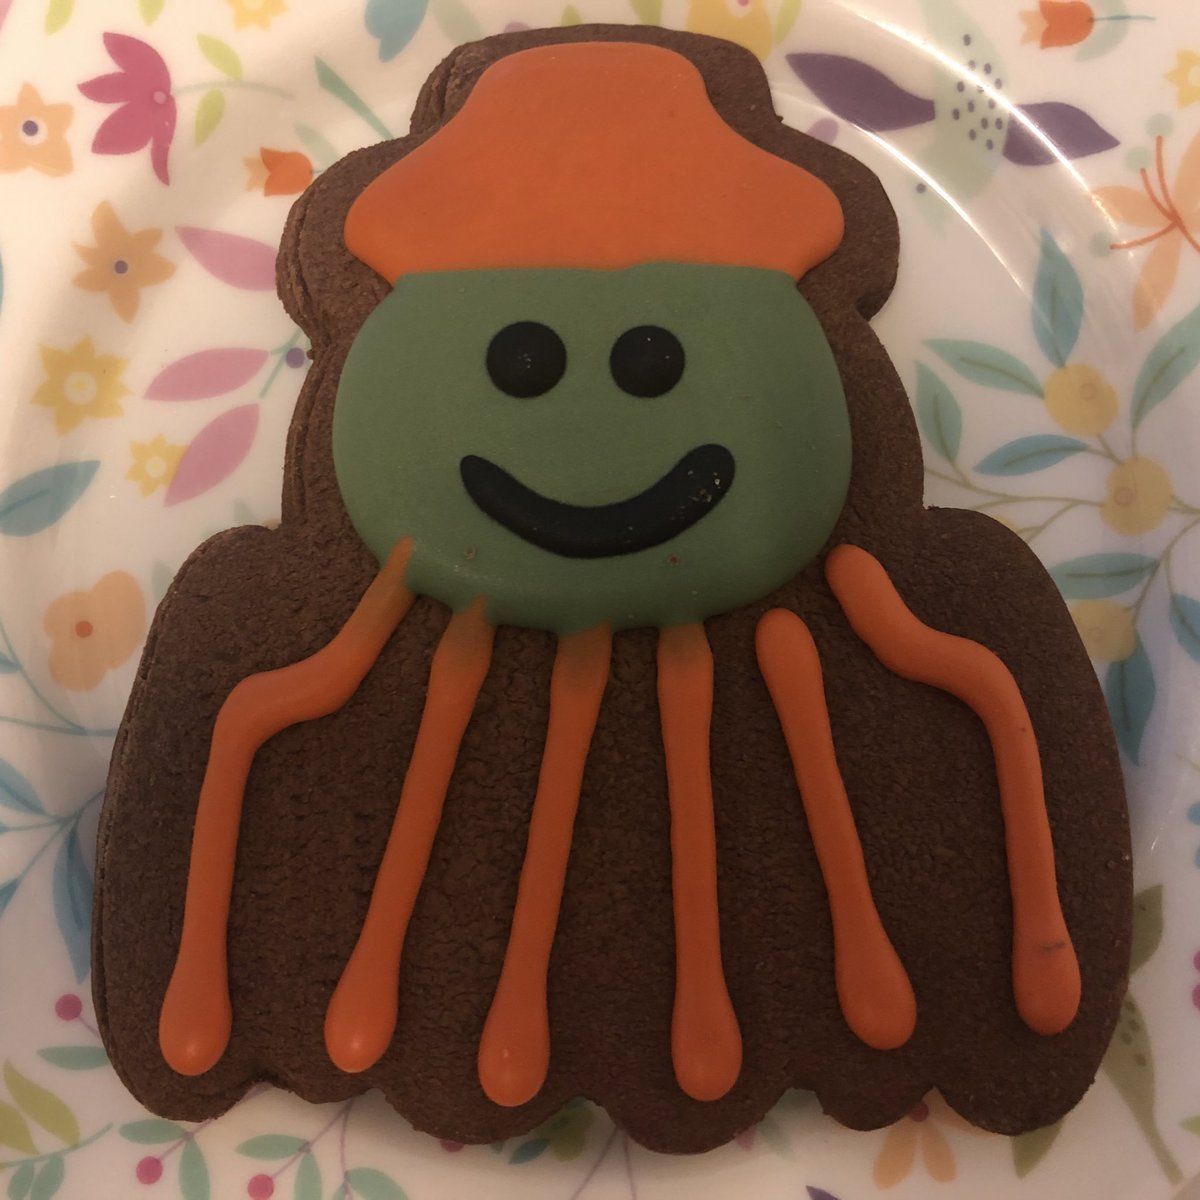 MORRISONS SPIDER BISCUITThis guy wears a hat apparently made from the same flesh as his own legs. That’s not just spooky, that’s metal as hell /5